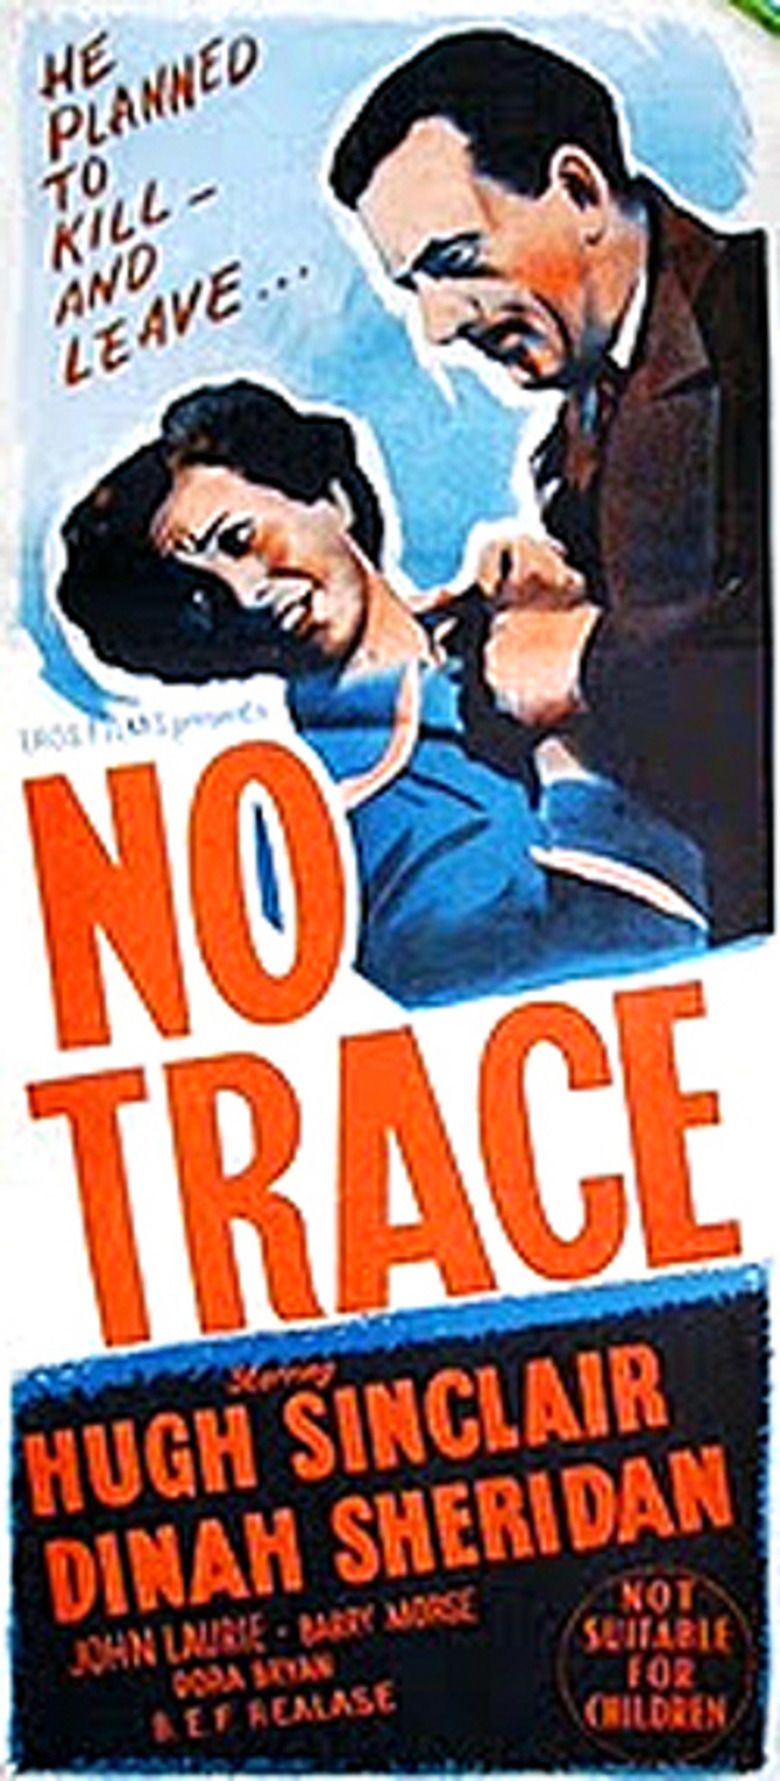 No Trace movie poster